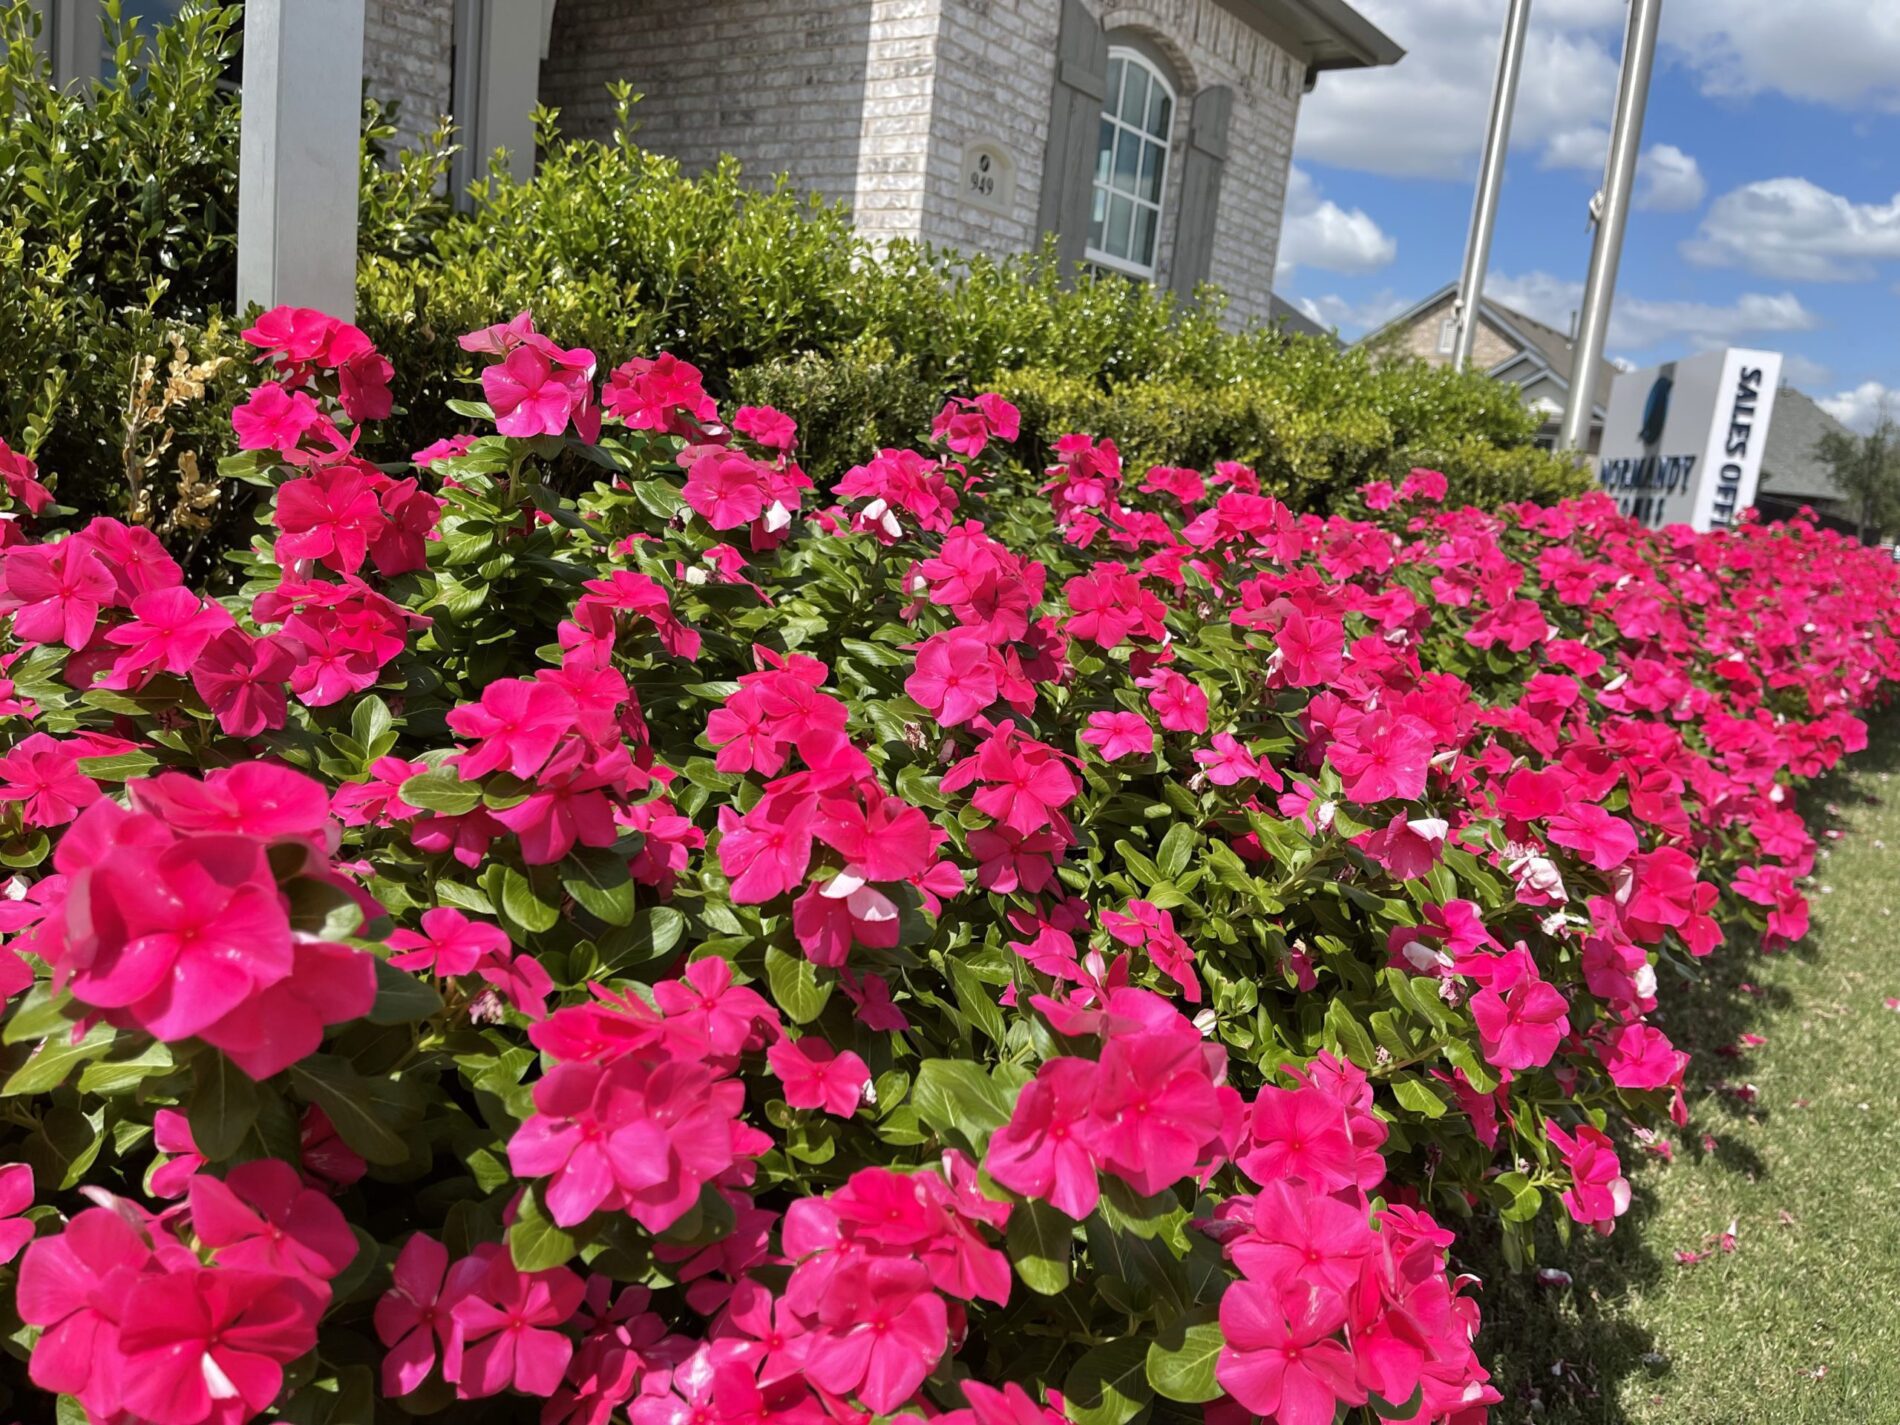 Best Landscaping Company in Sachse, Texas - My Neighbor Services